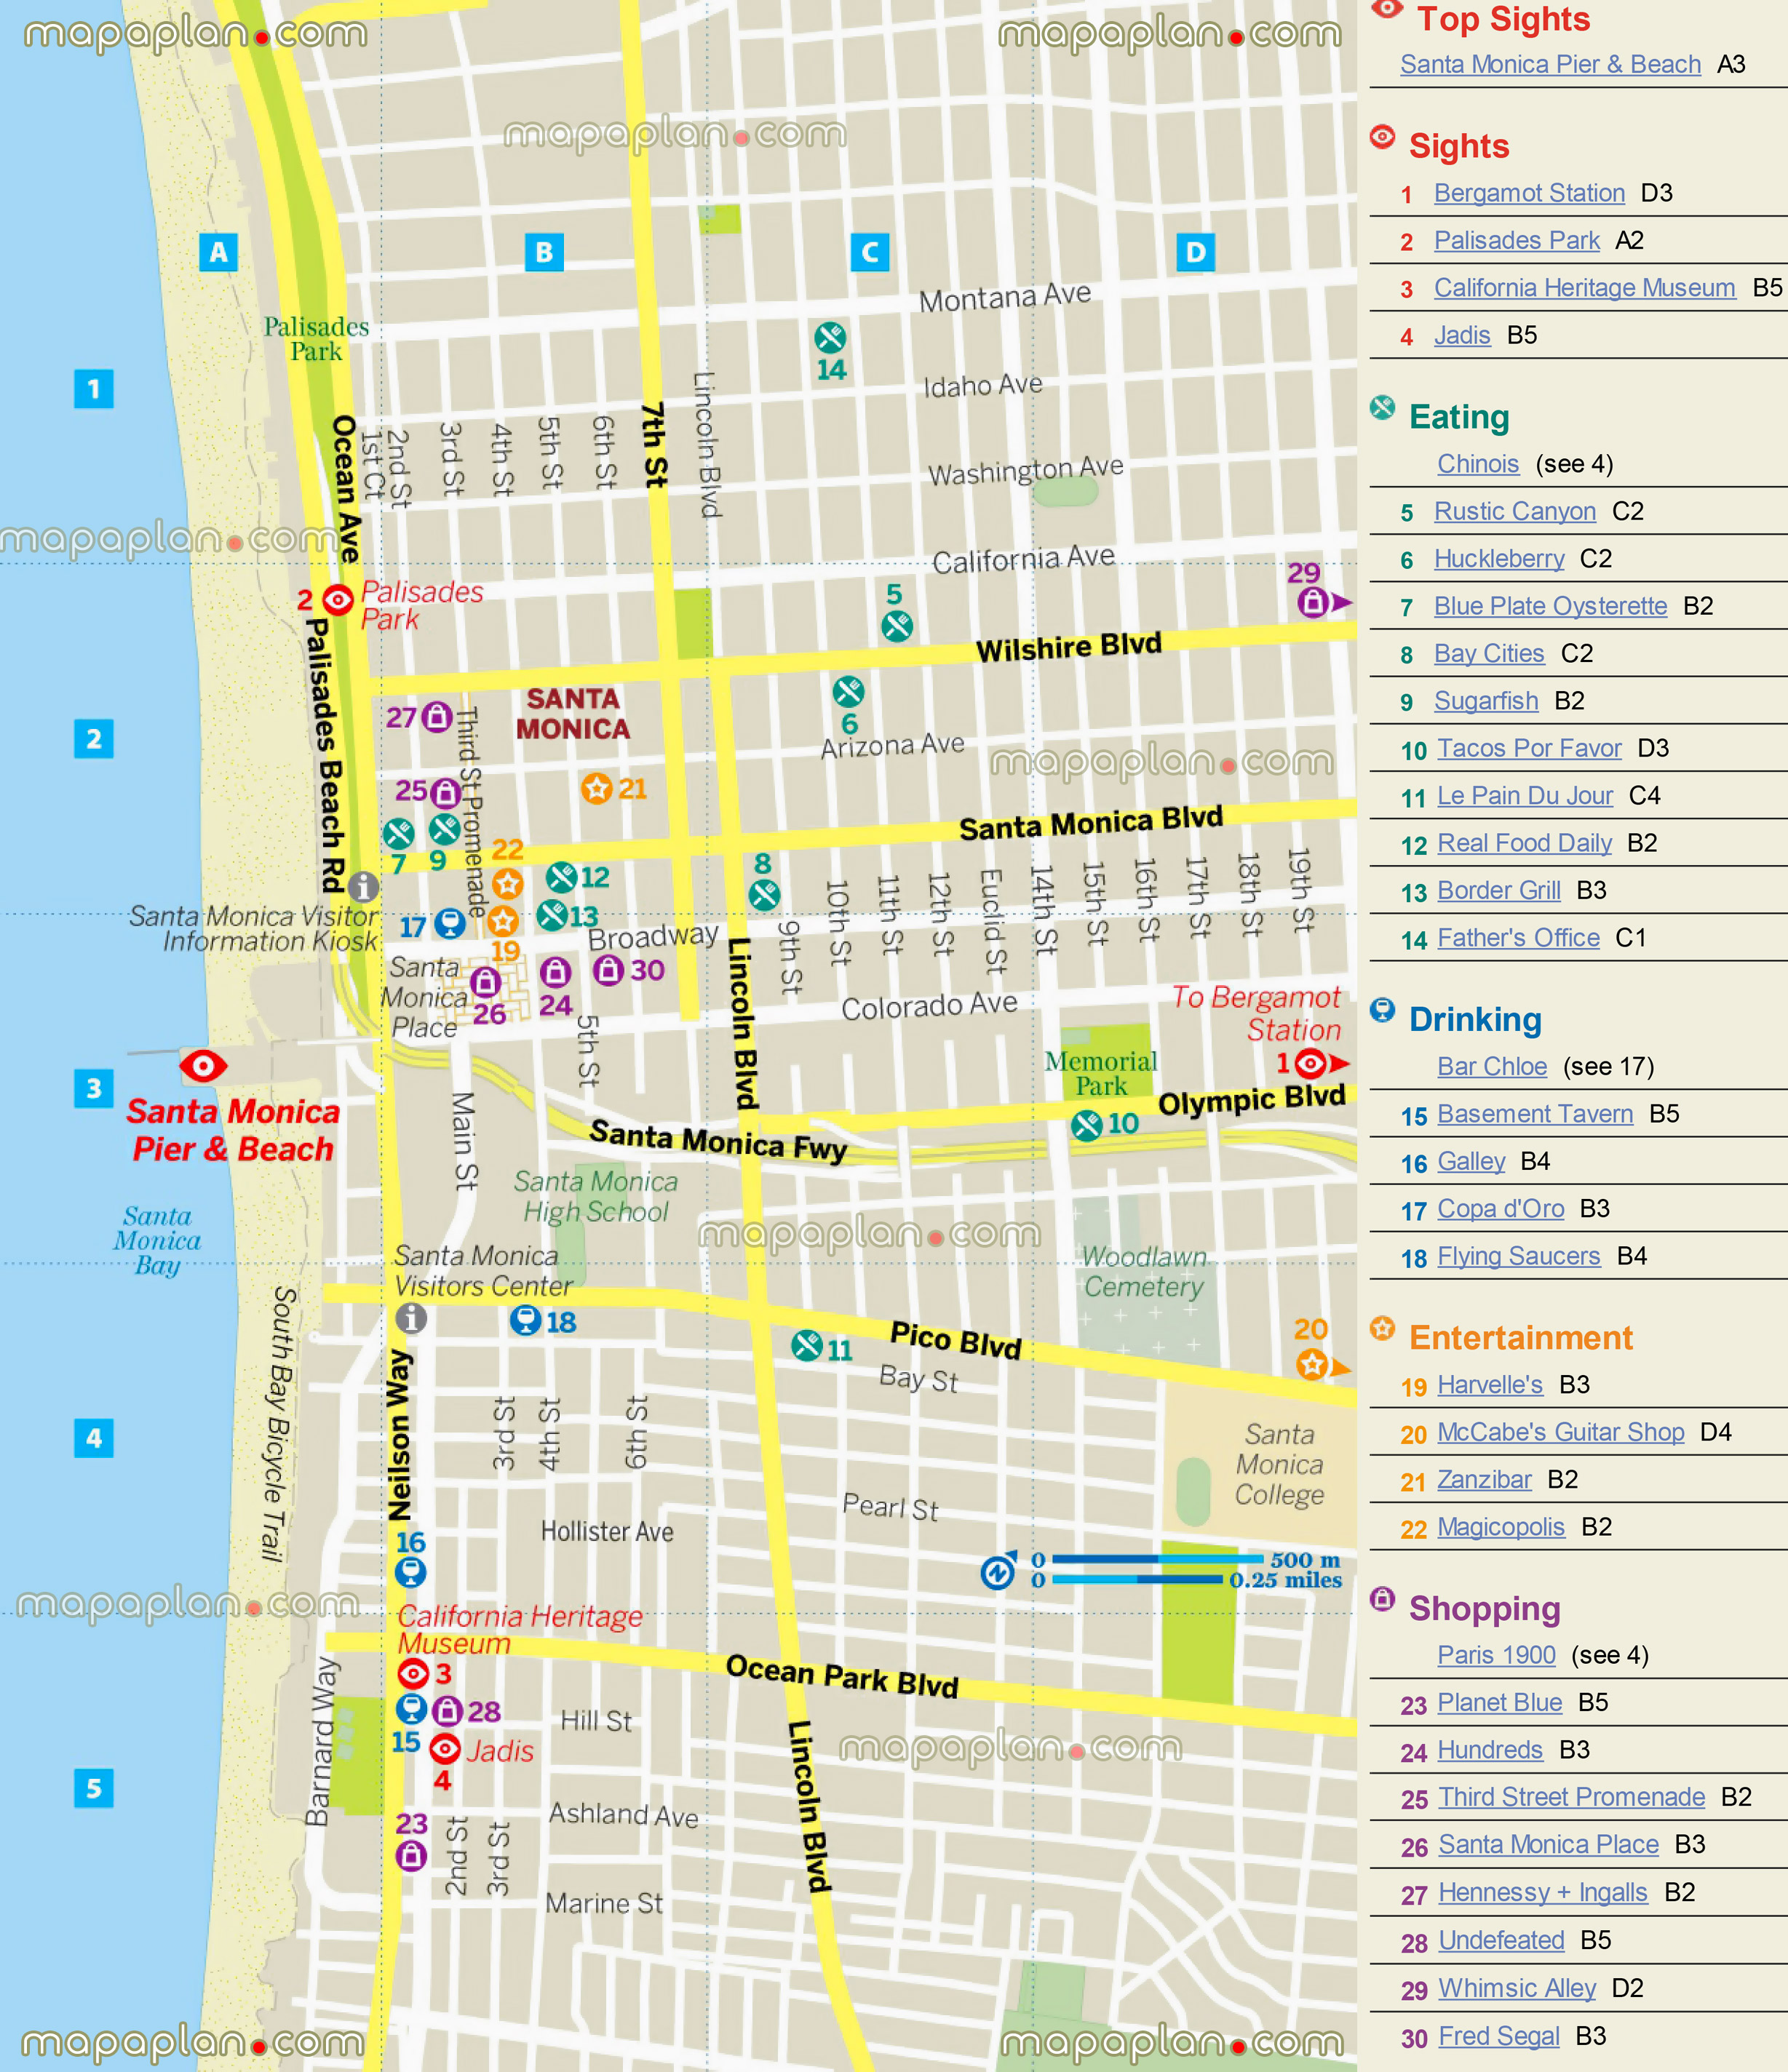 los-angeles-map-santa-monica-pier-beach-tourist-guide-map-with